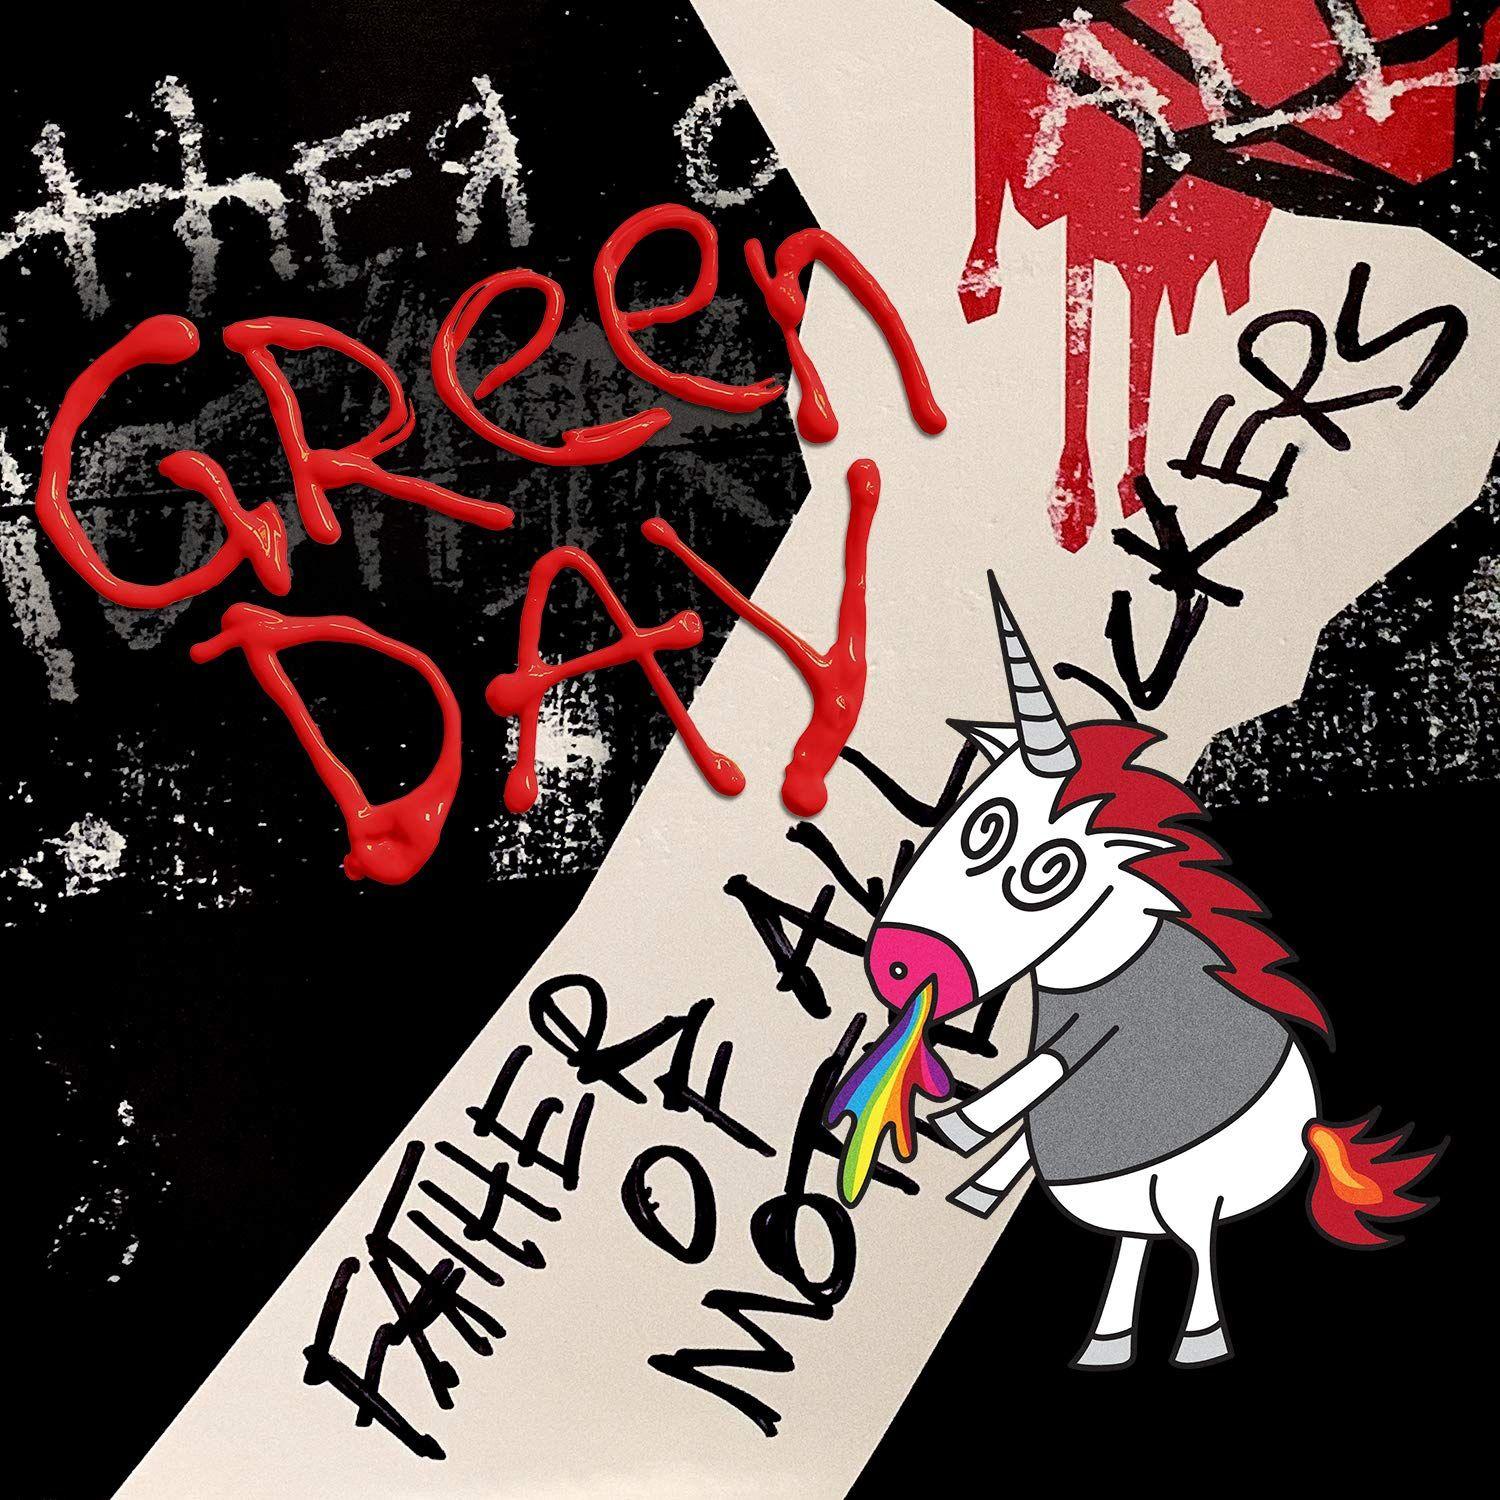 New Green Day Album Father of All Motherf*ckers coming February